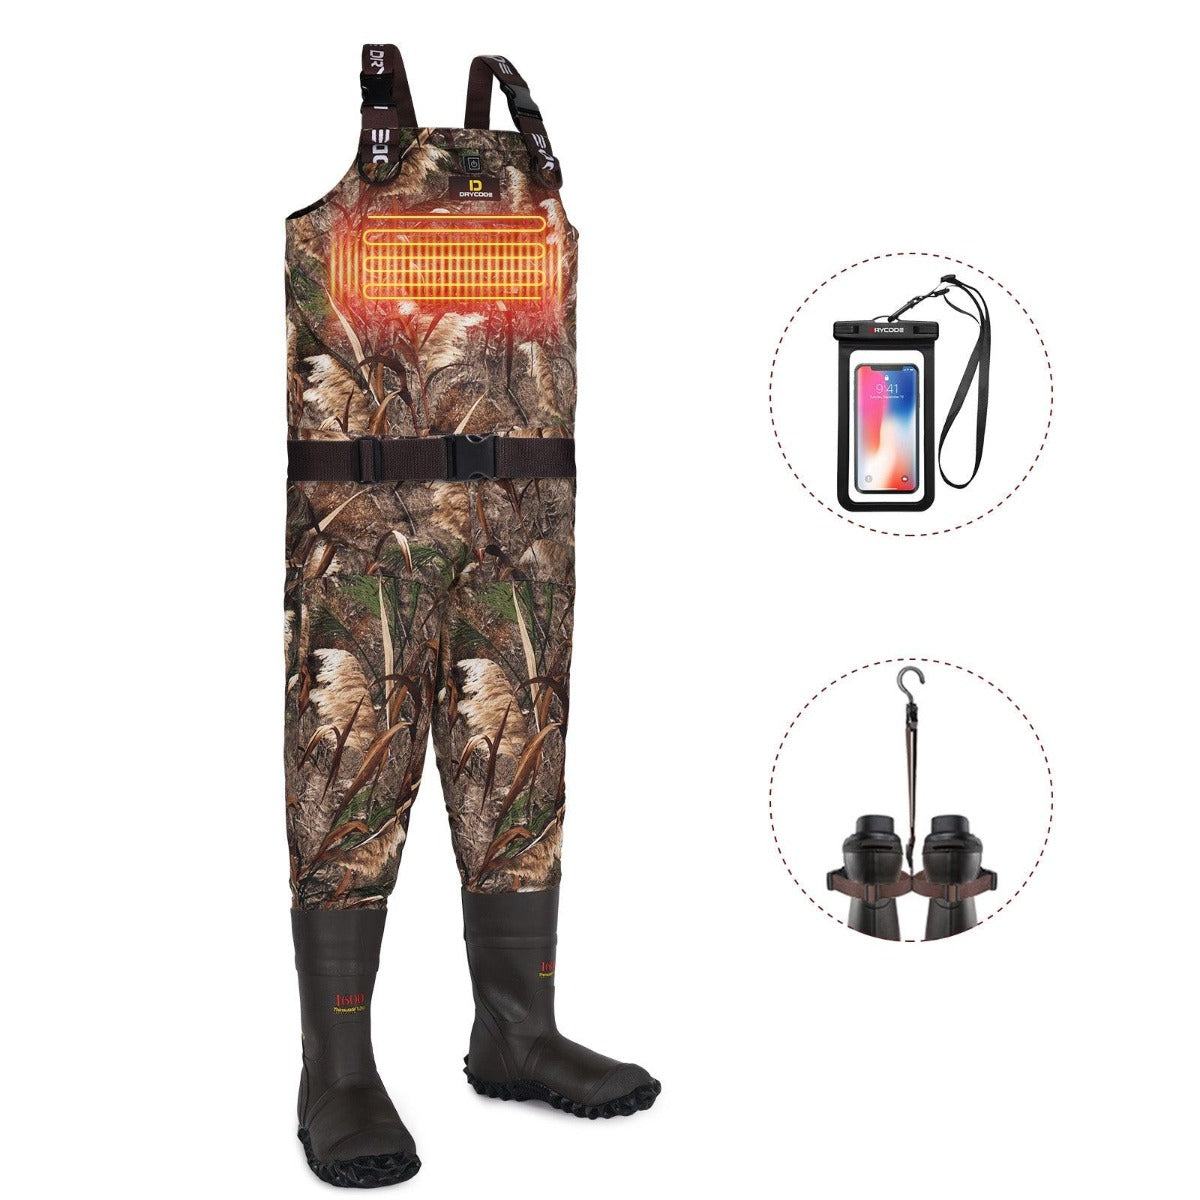 DRYCODE Chest Waders, Neoprene Waders for Men with 600G Boots, Waterproof  Insulated Camo Duck Hunting Waders, Wader for Women 12 Reel Reed